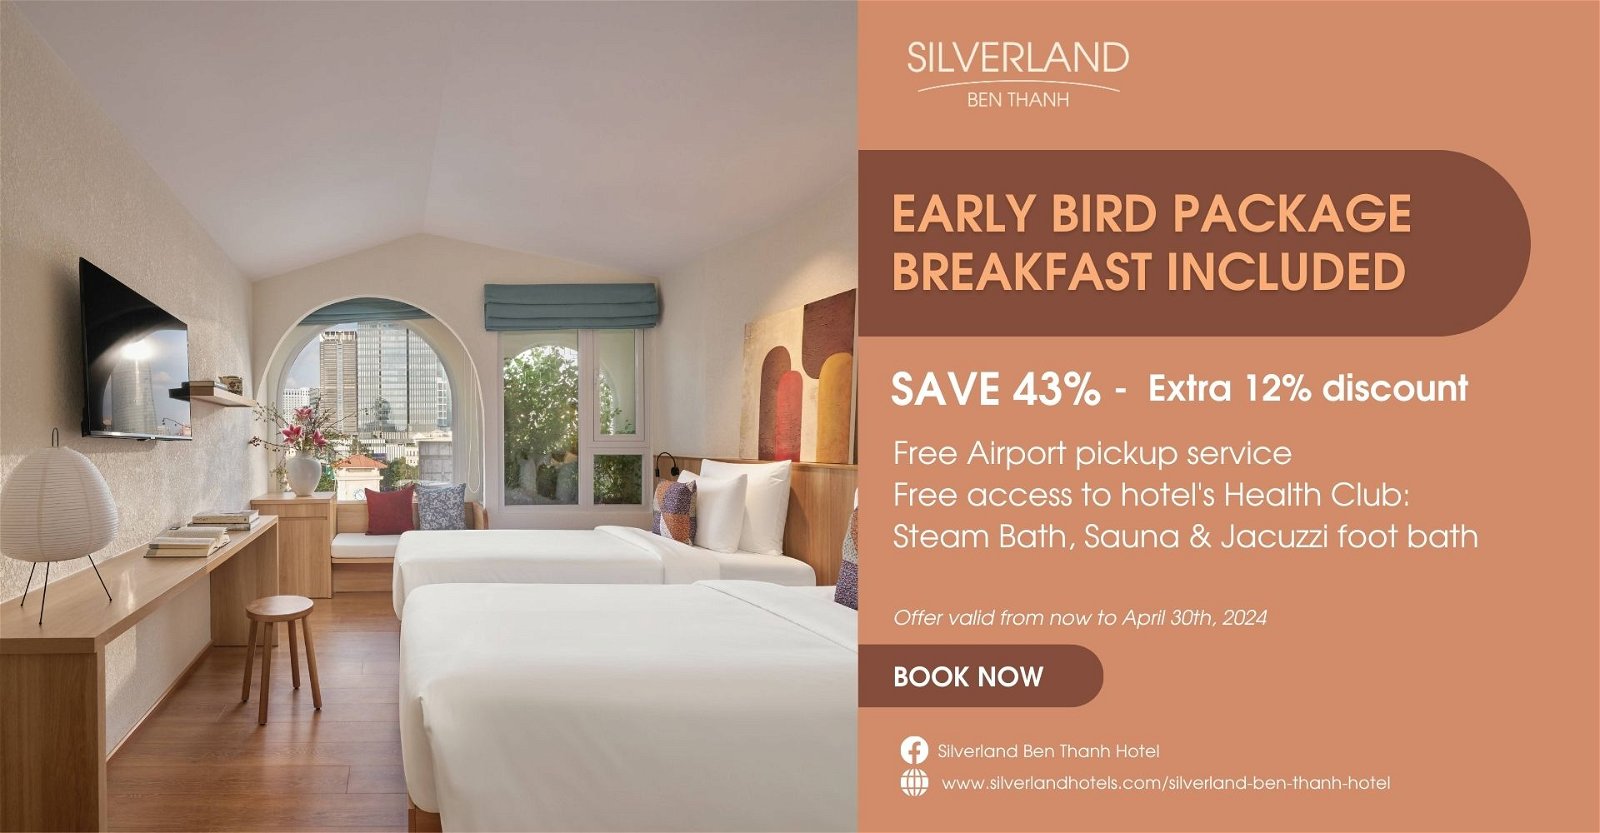 SILVERLAND BEN THANH – EARLY BIRD BREAKFAST INCLUDED (SAVE 43%)